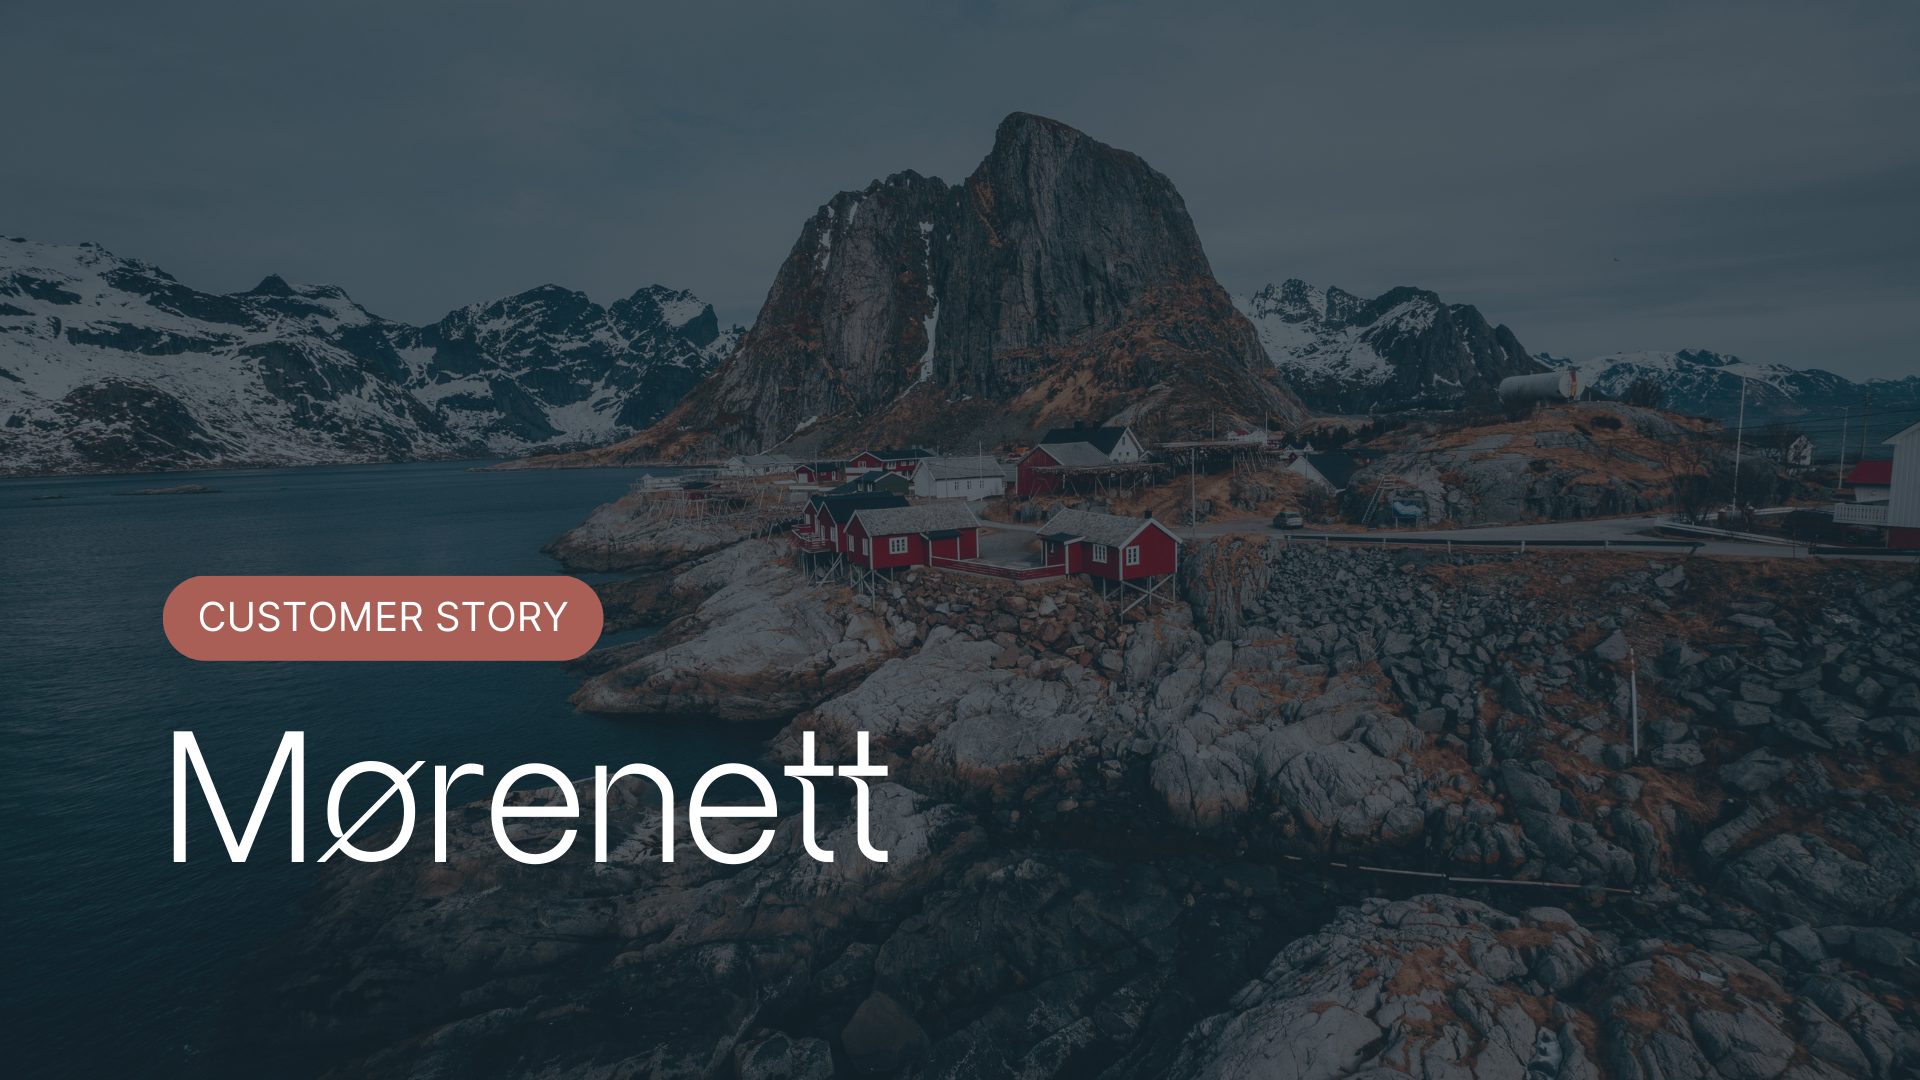 The tool that allows Mørenett to follow-up of targets, strategies and KPIs